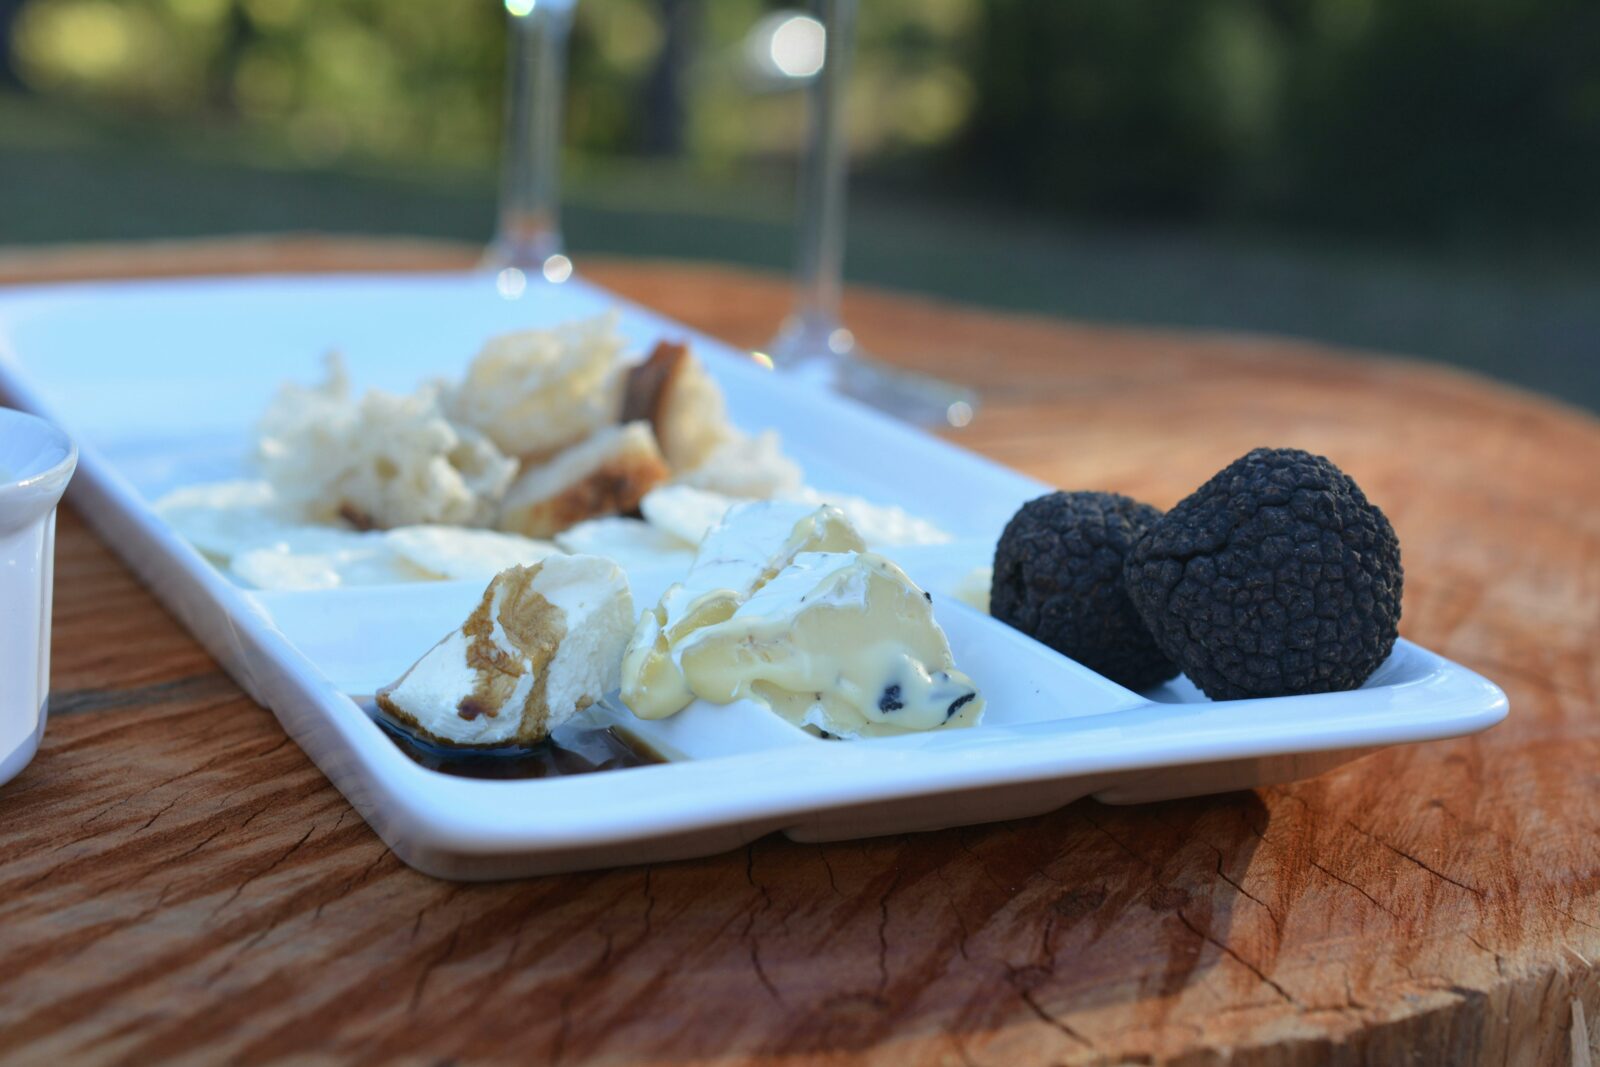 Join in a truffle tasting or a fungi dinner